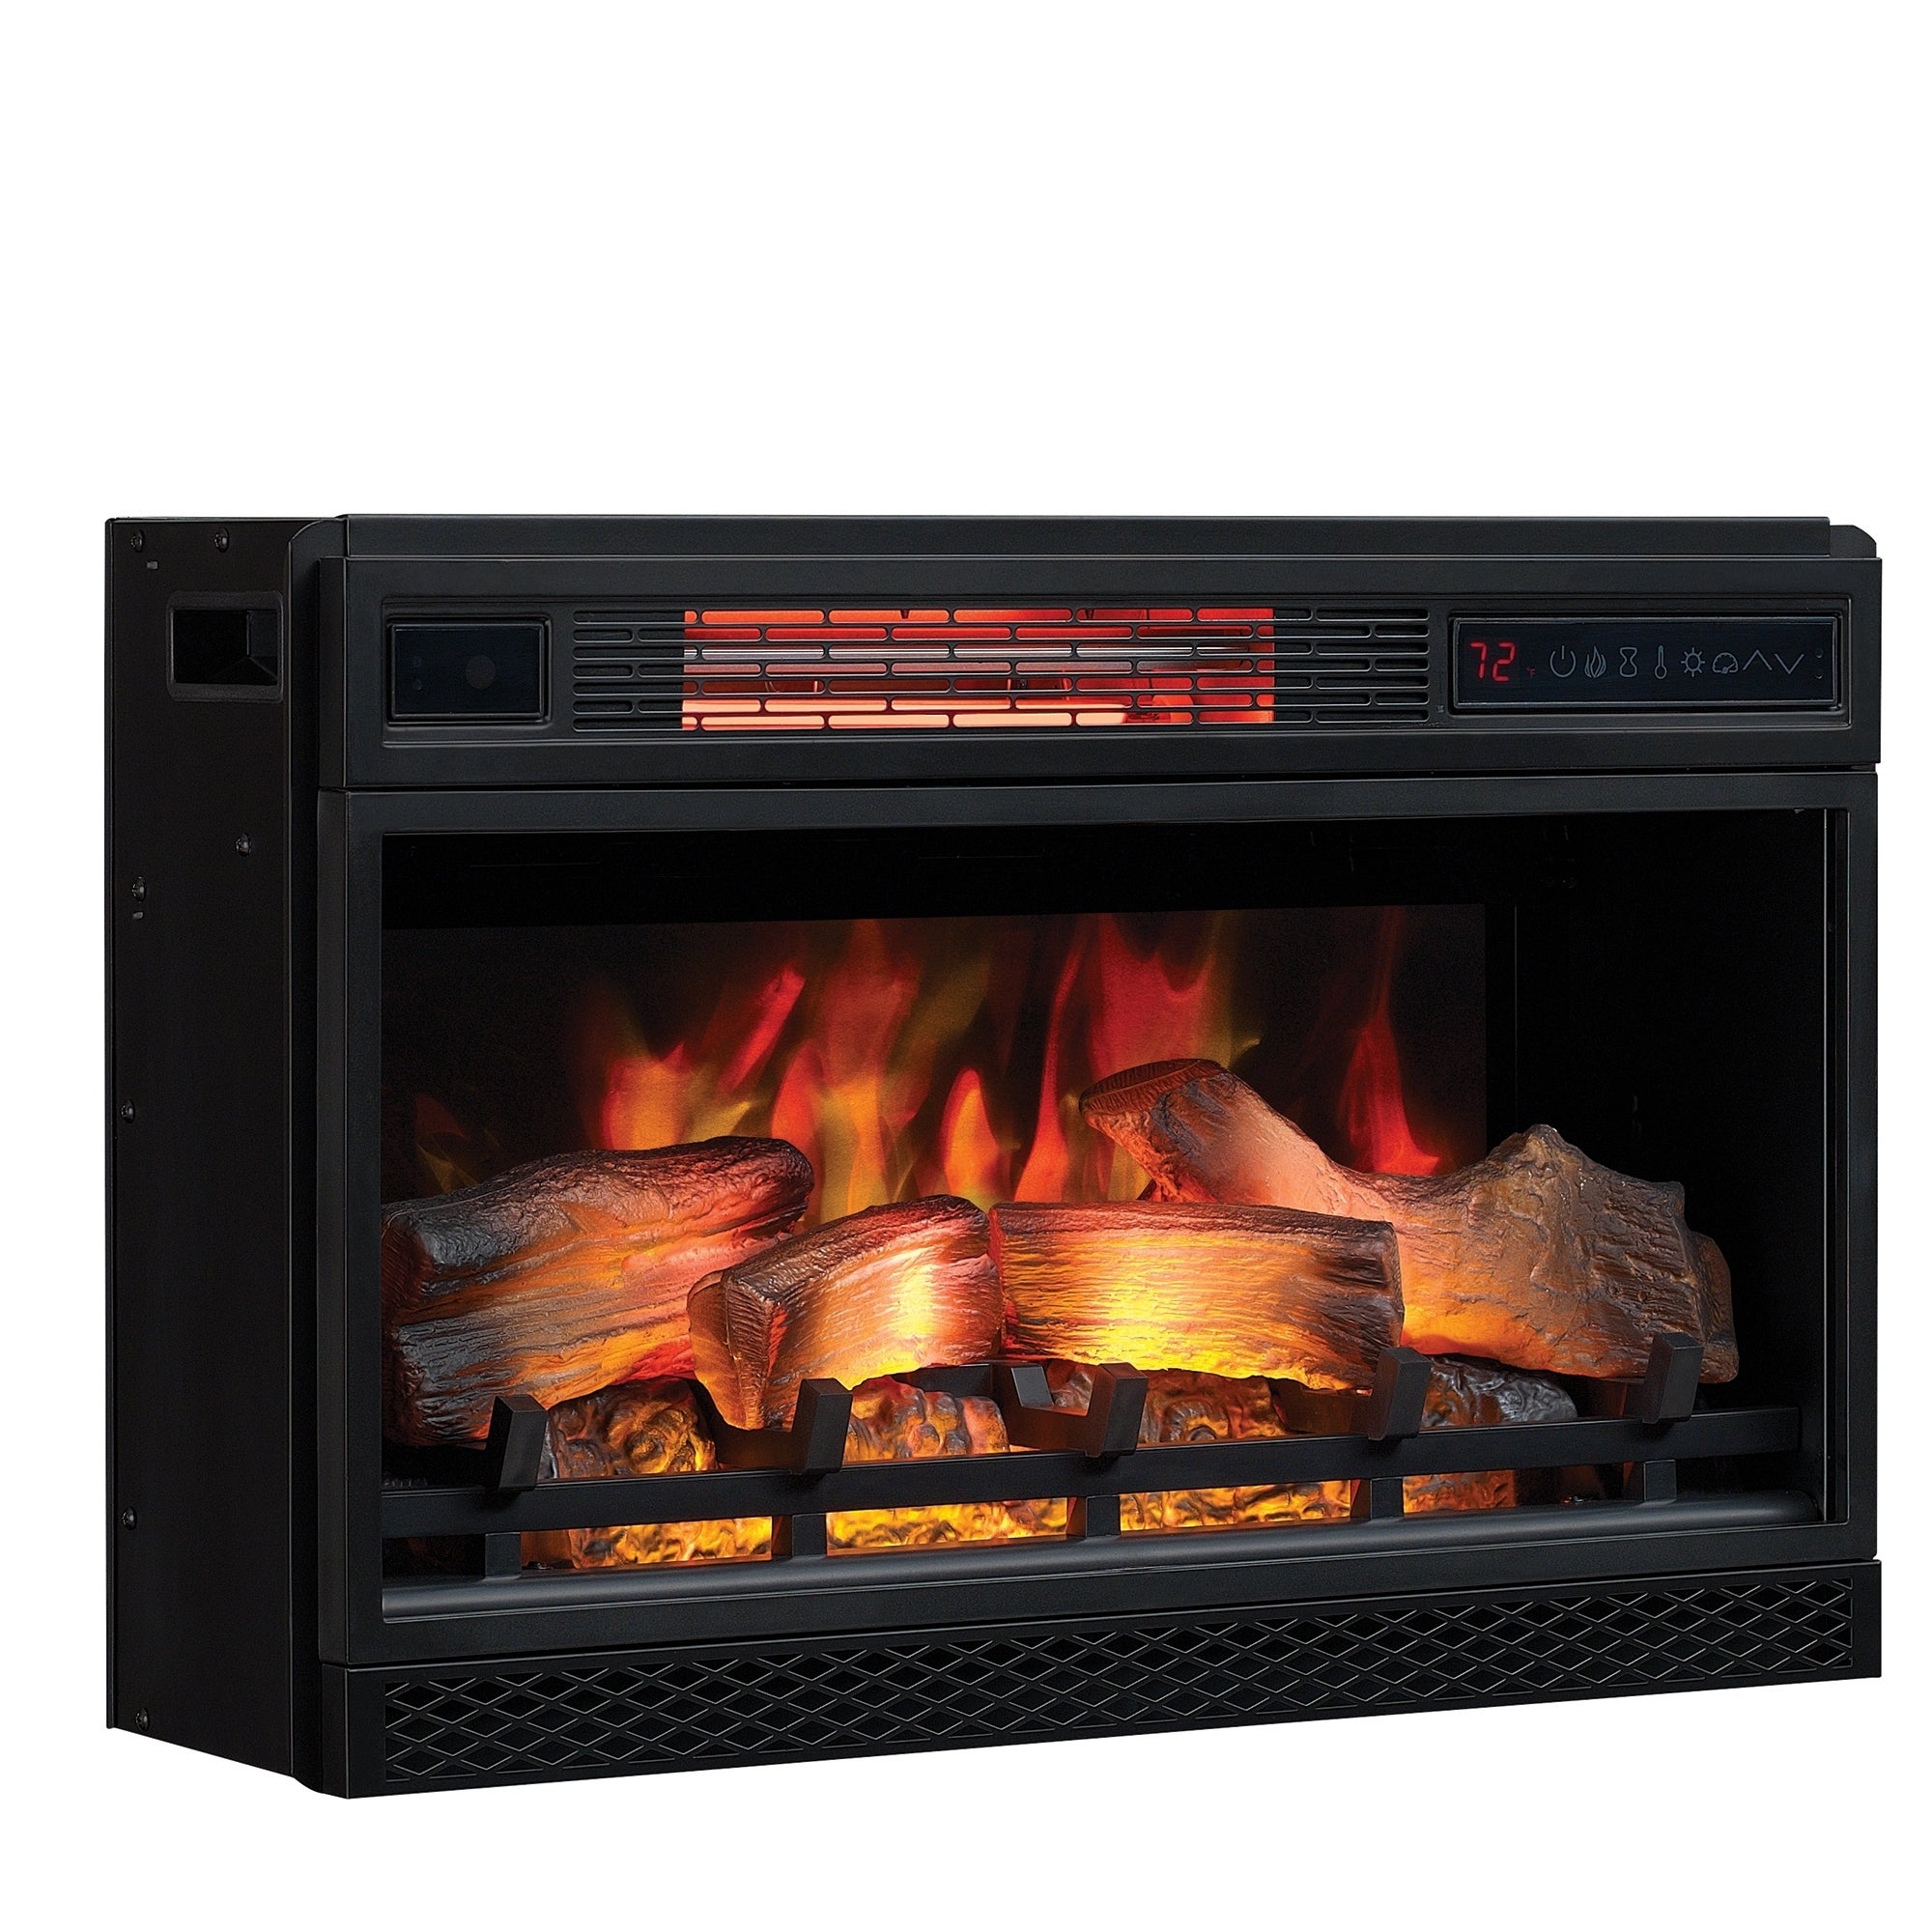 Wood Electric Fireplace Beautiful Classicflame 26" 3d Infrared Quartz Electric Fireplace Insert